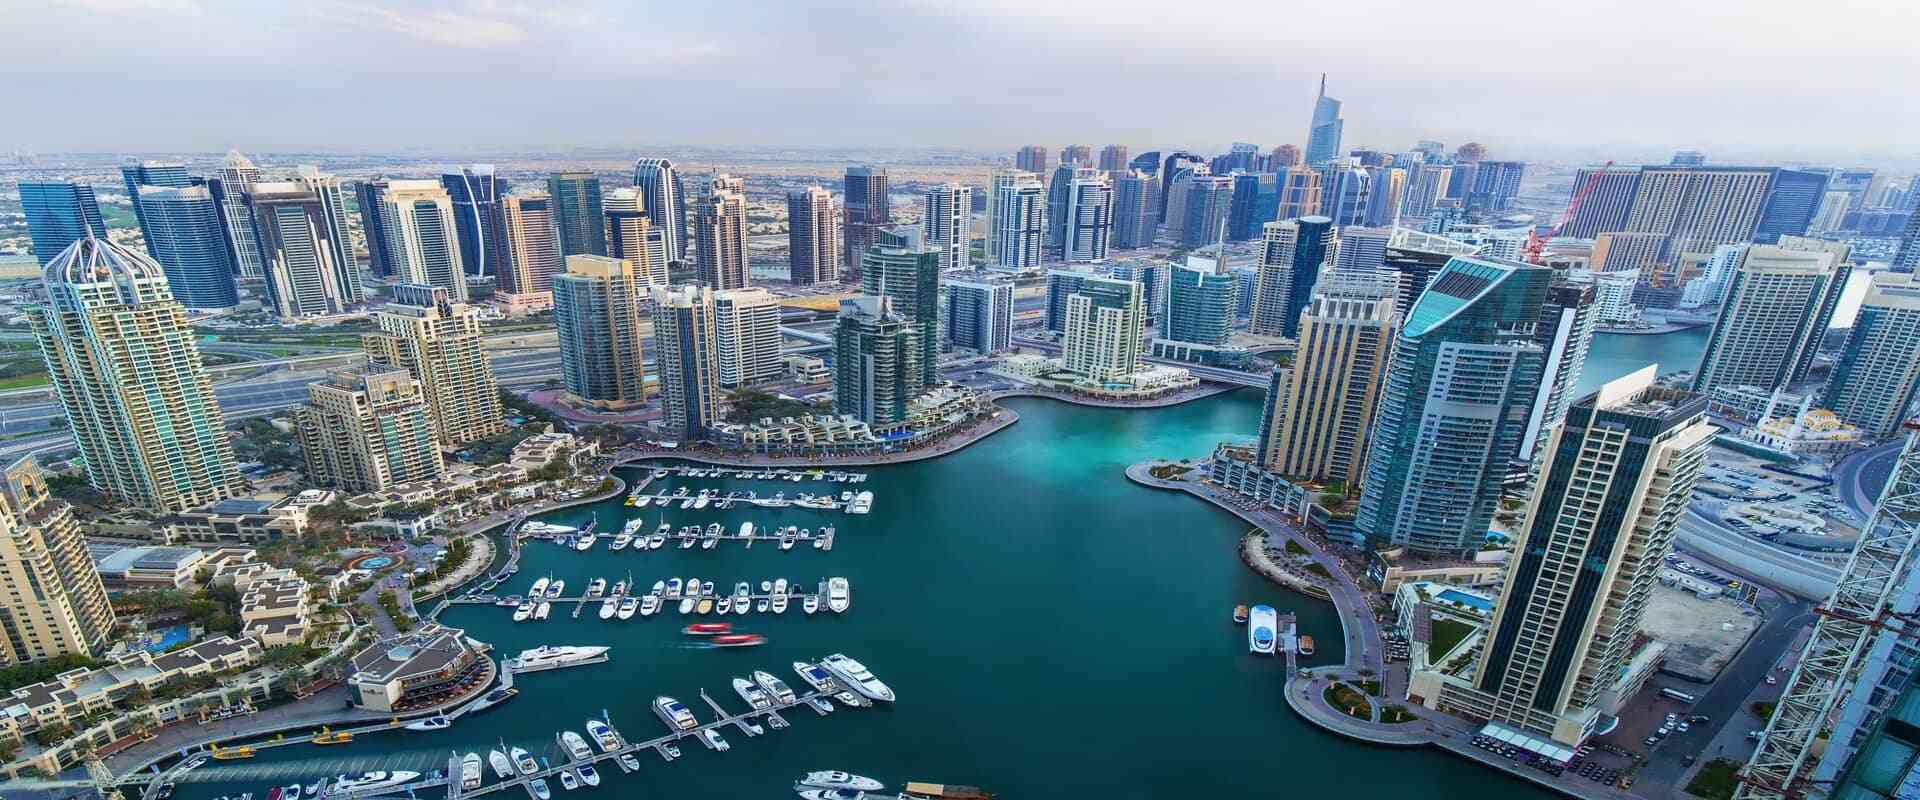 Dubai's real estate market reached all-time highs